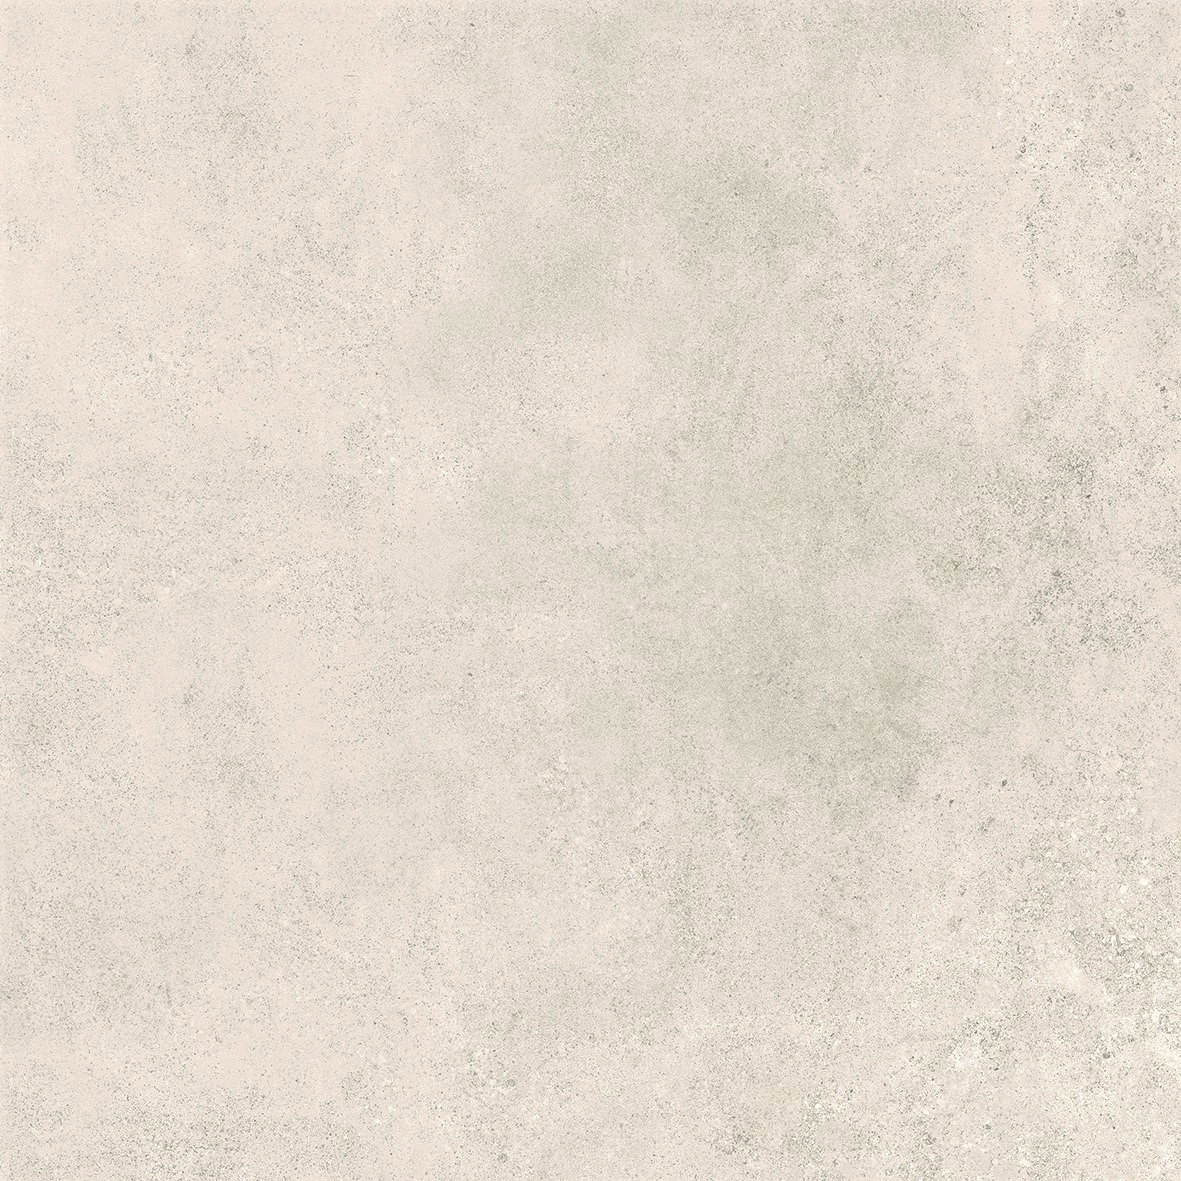 4 X 12 Absolute White Rectified Porcelain tile